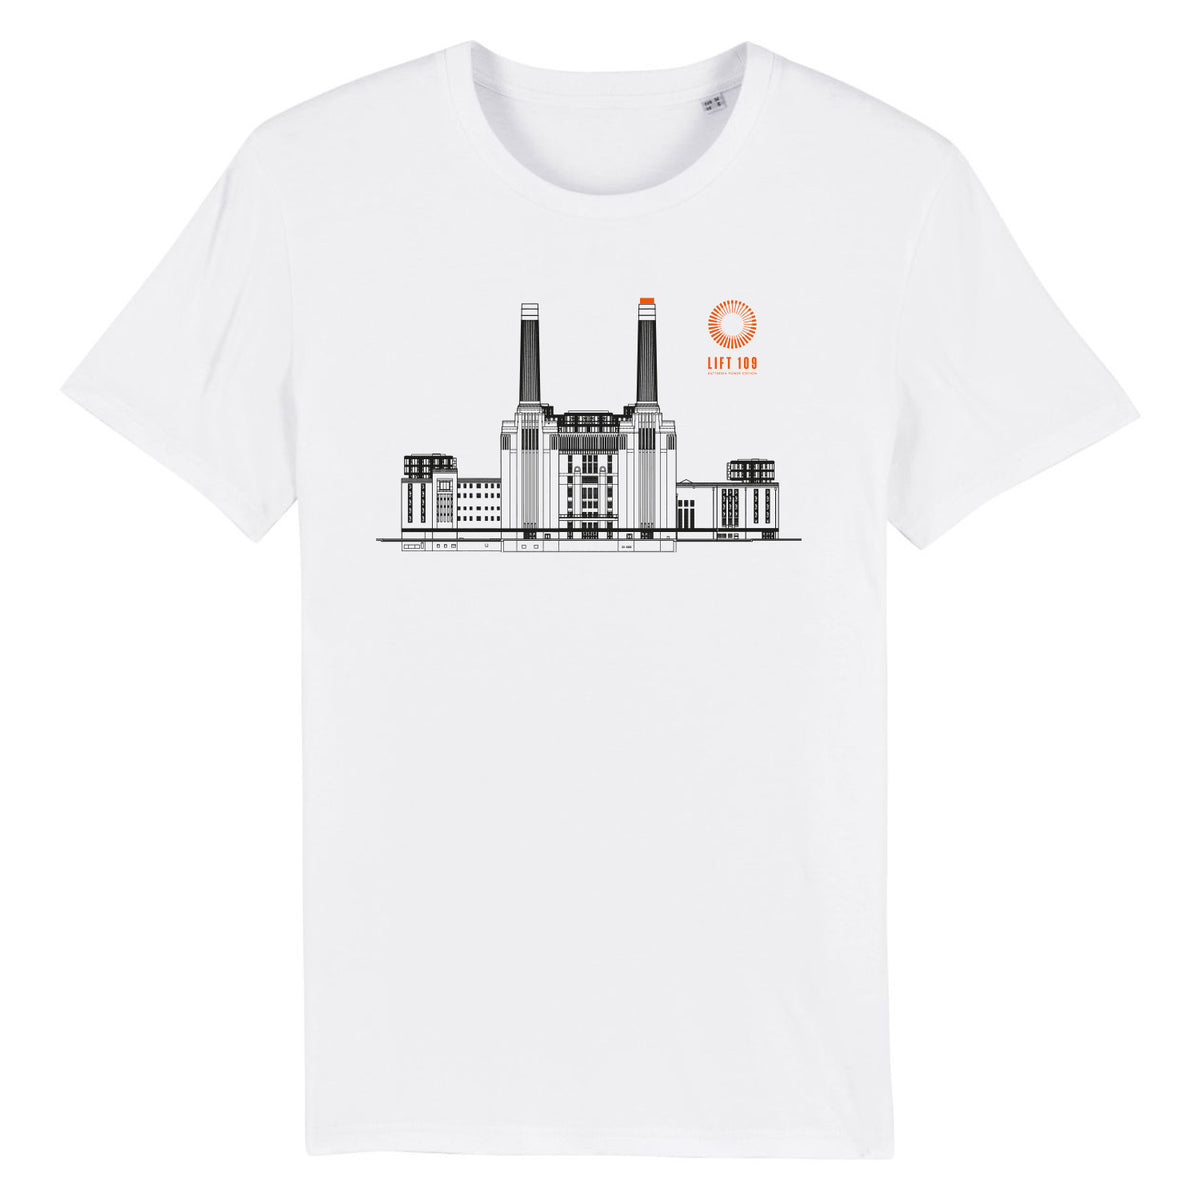 Architectural Drawing - White Unisex T-shirt